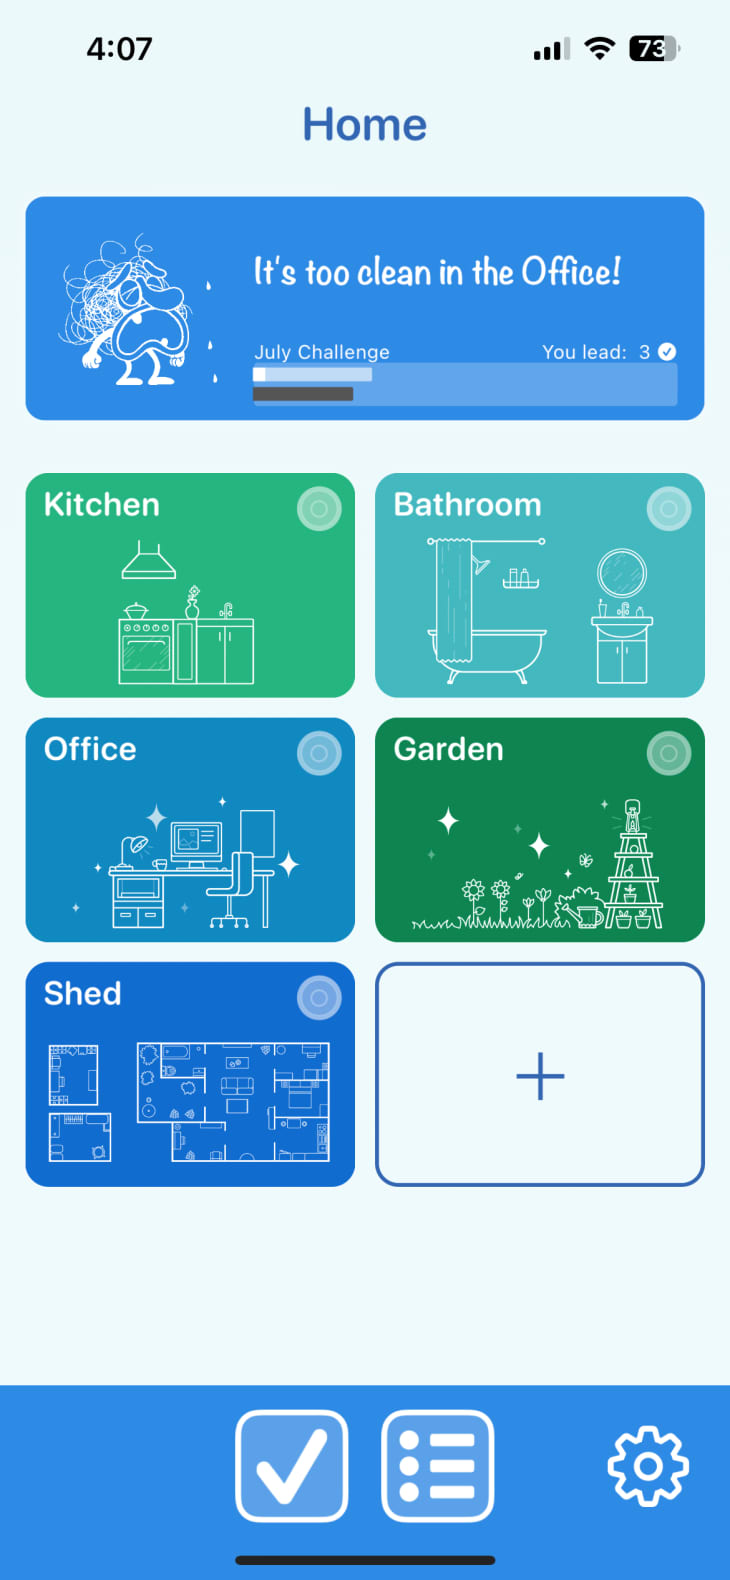 green and blue boxes with rounded edges, headers of different rooms, check mark and list symbol at bottom, plus sign to add more rooms